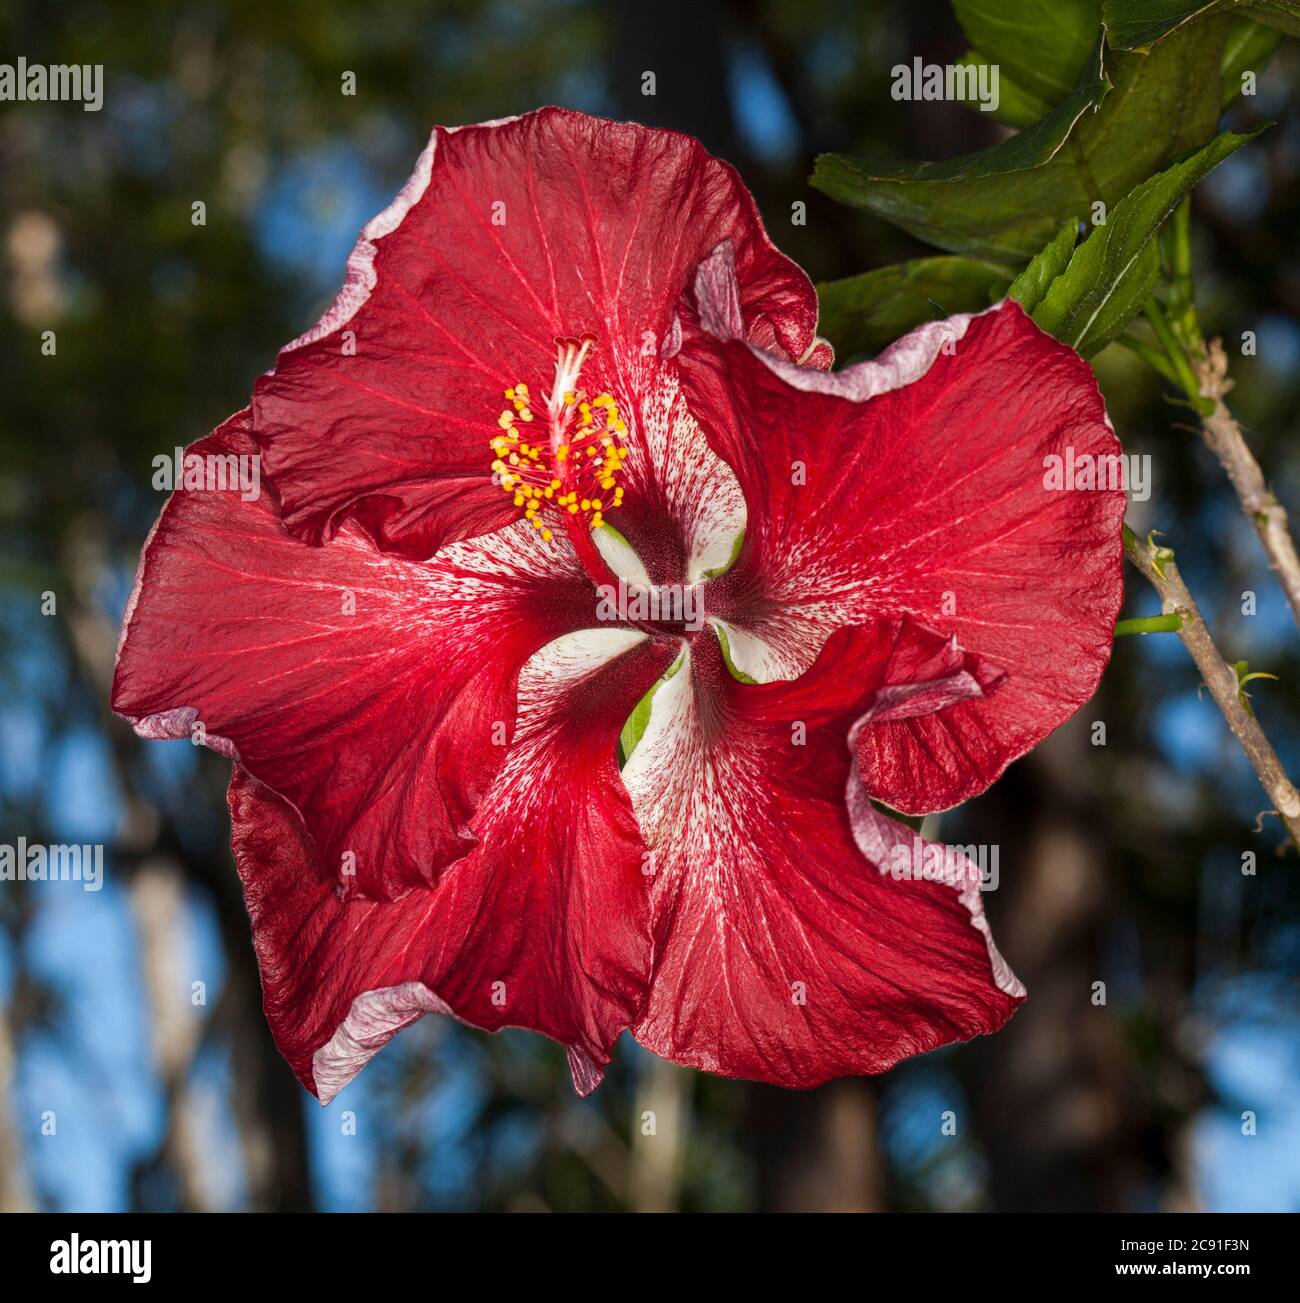 Unusual large vivid red flower daubed with flecks of white of Hawaiian Hibiscus cultivar  'Dragon's Breath' against background of blue sky and foliage Stock Photo